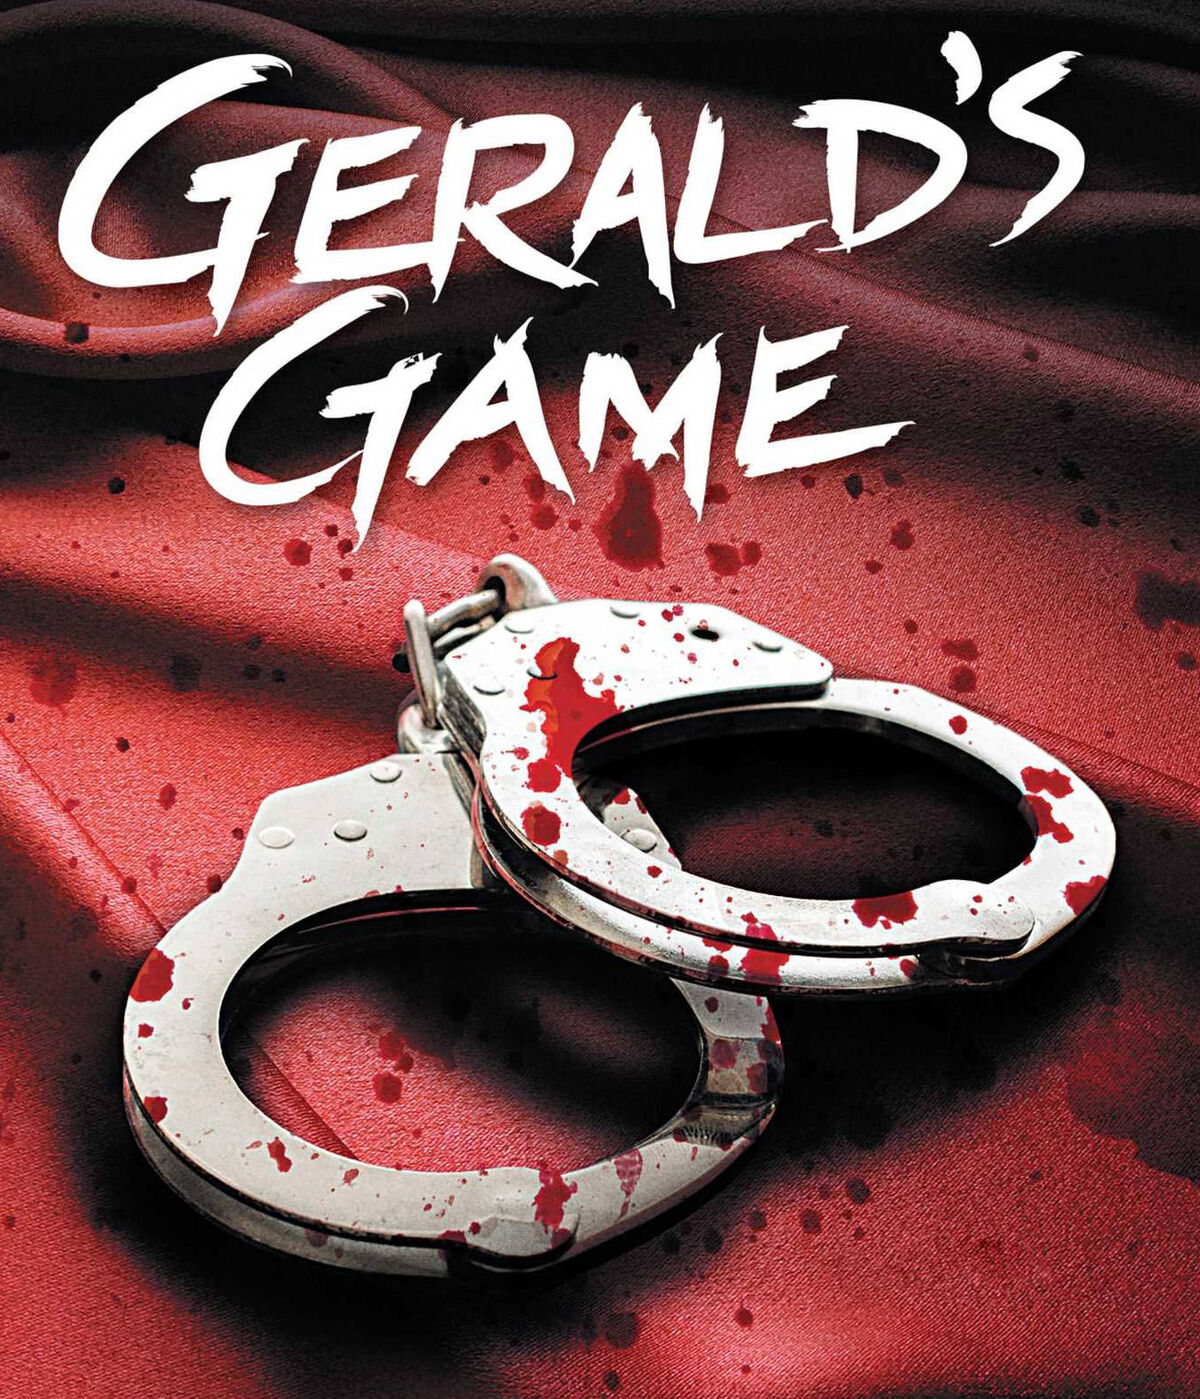 geralds-game-cover with bloody handcuffs